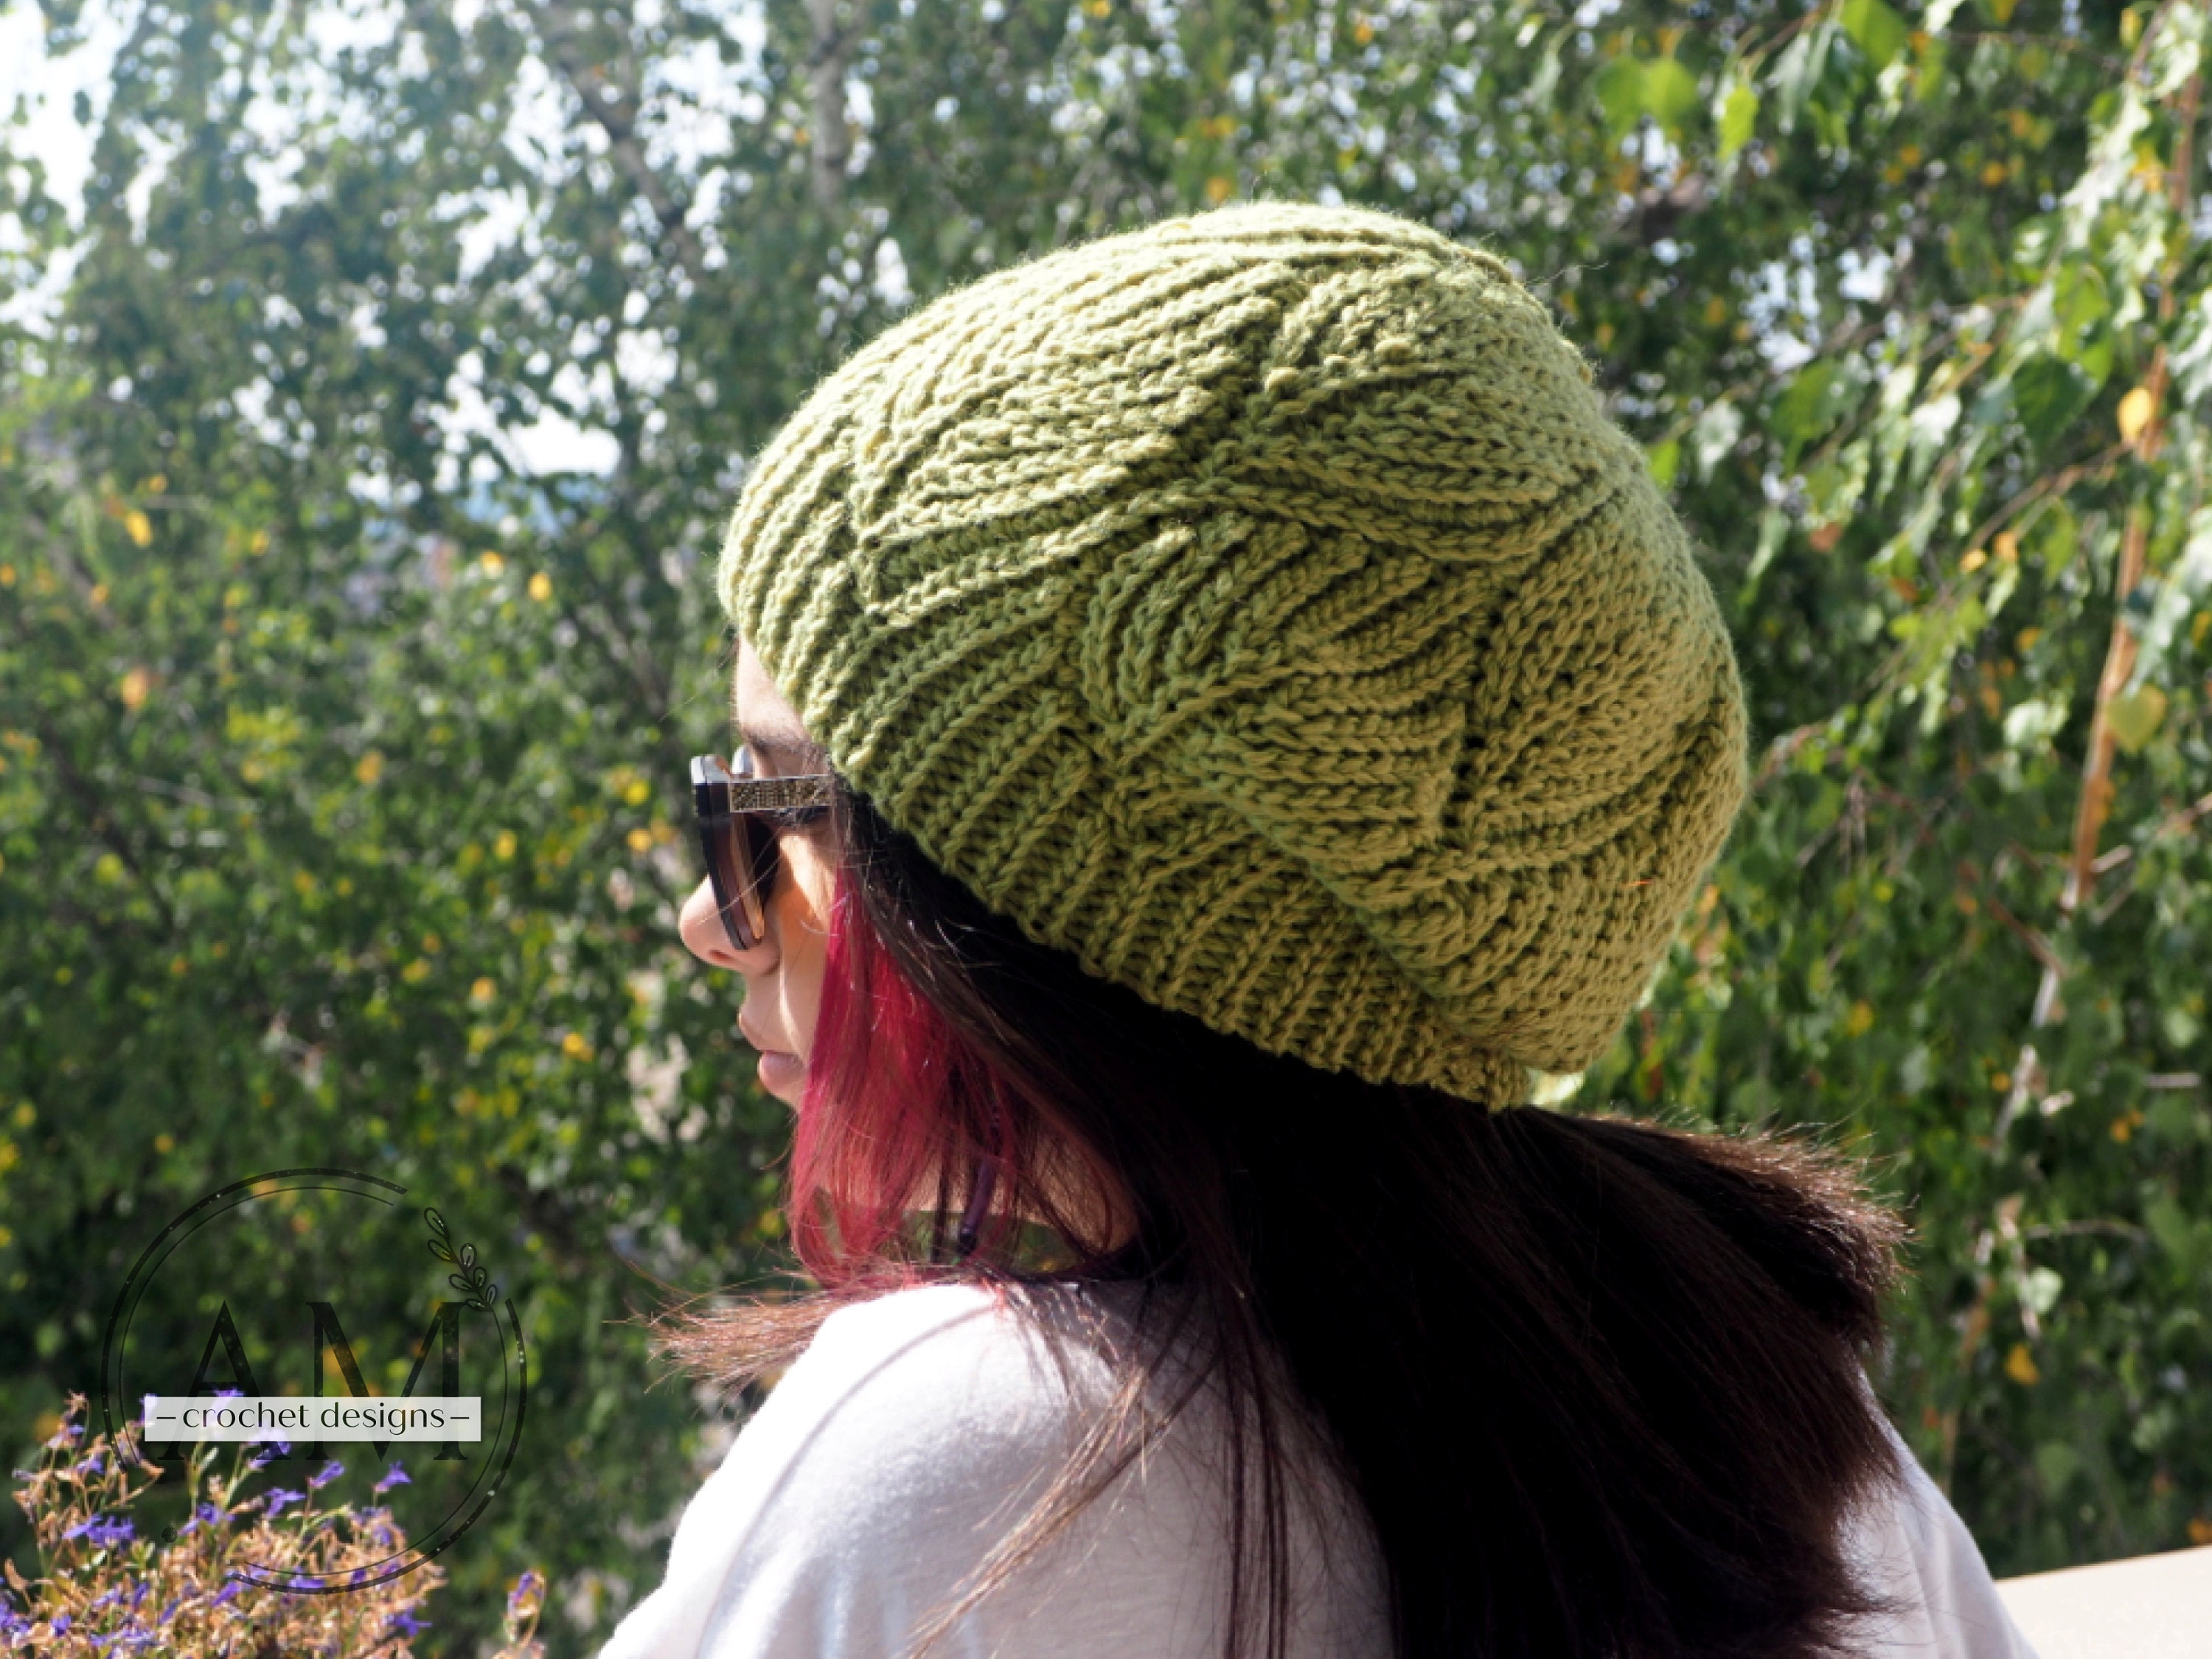 VARIEGATED SLOUCHY HAT FREE CROCHET PATTERN - Alena's Design